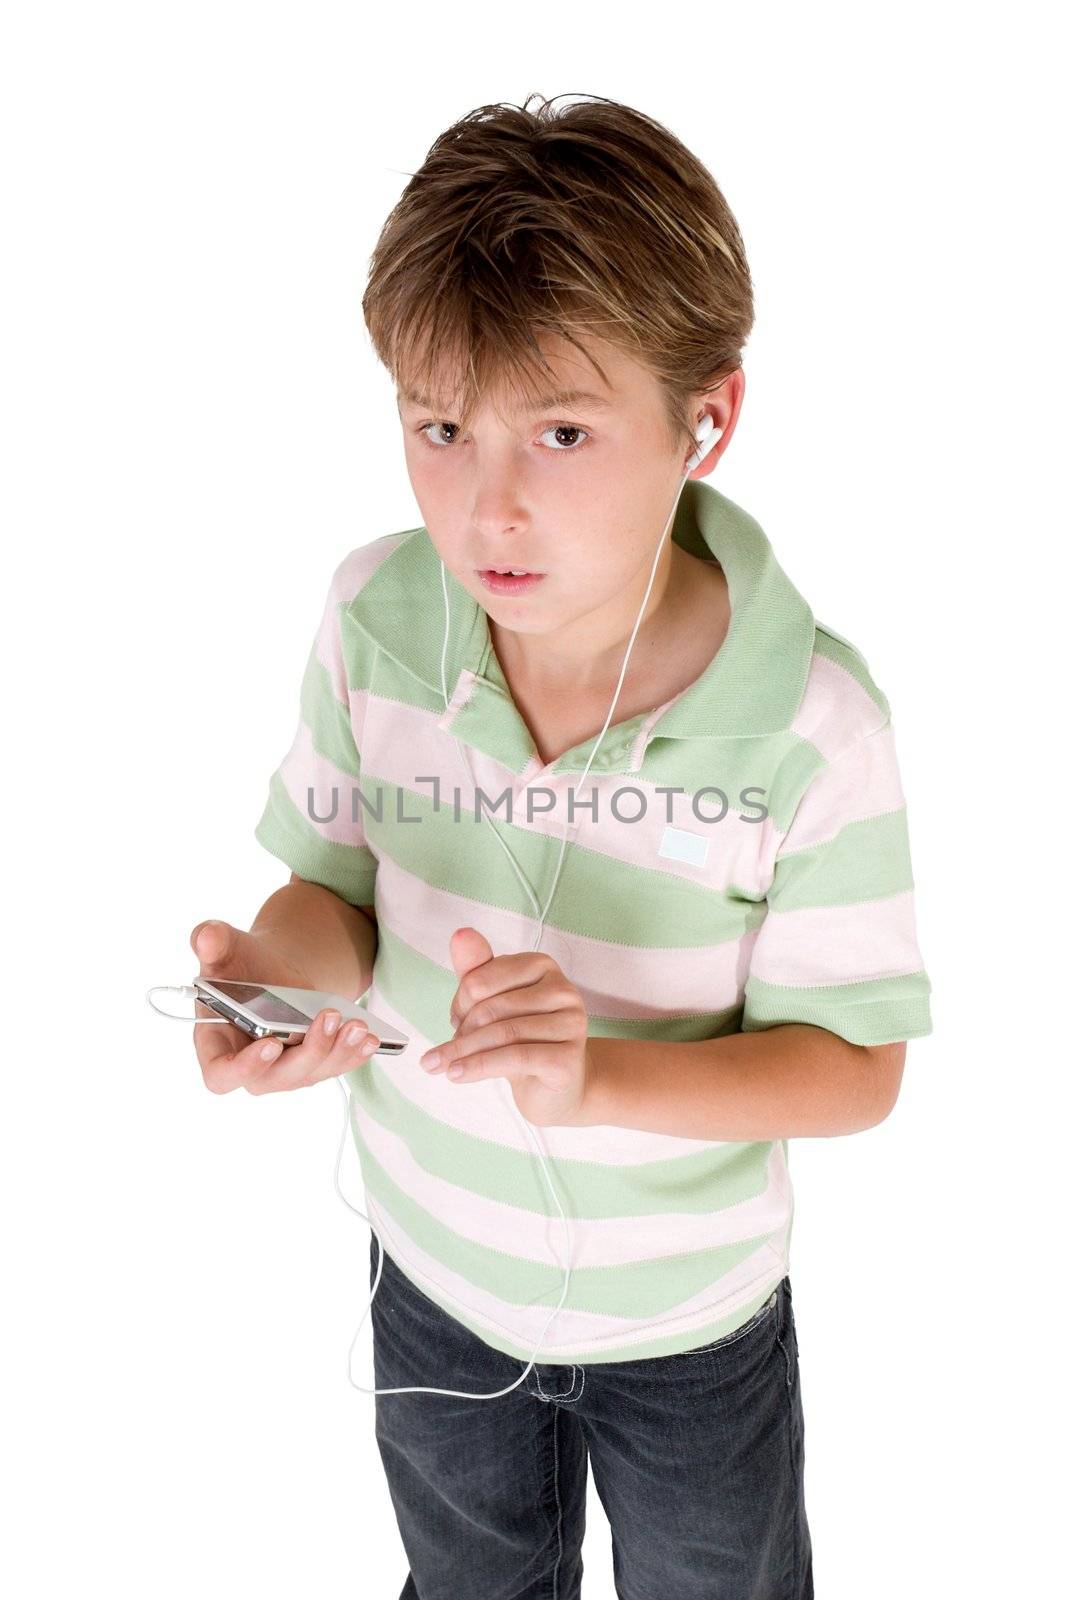 A child dressed in jeans and polo shirt holding an mp3 player.